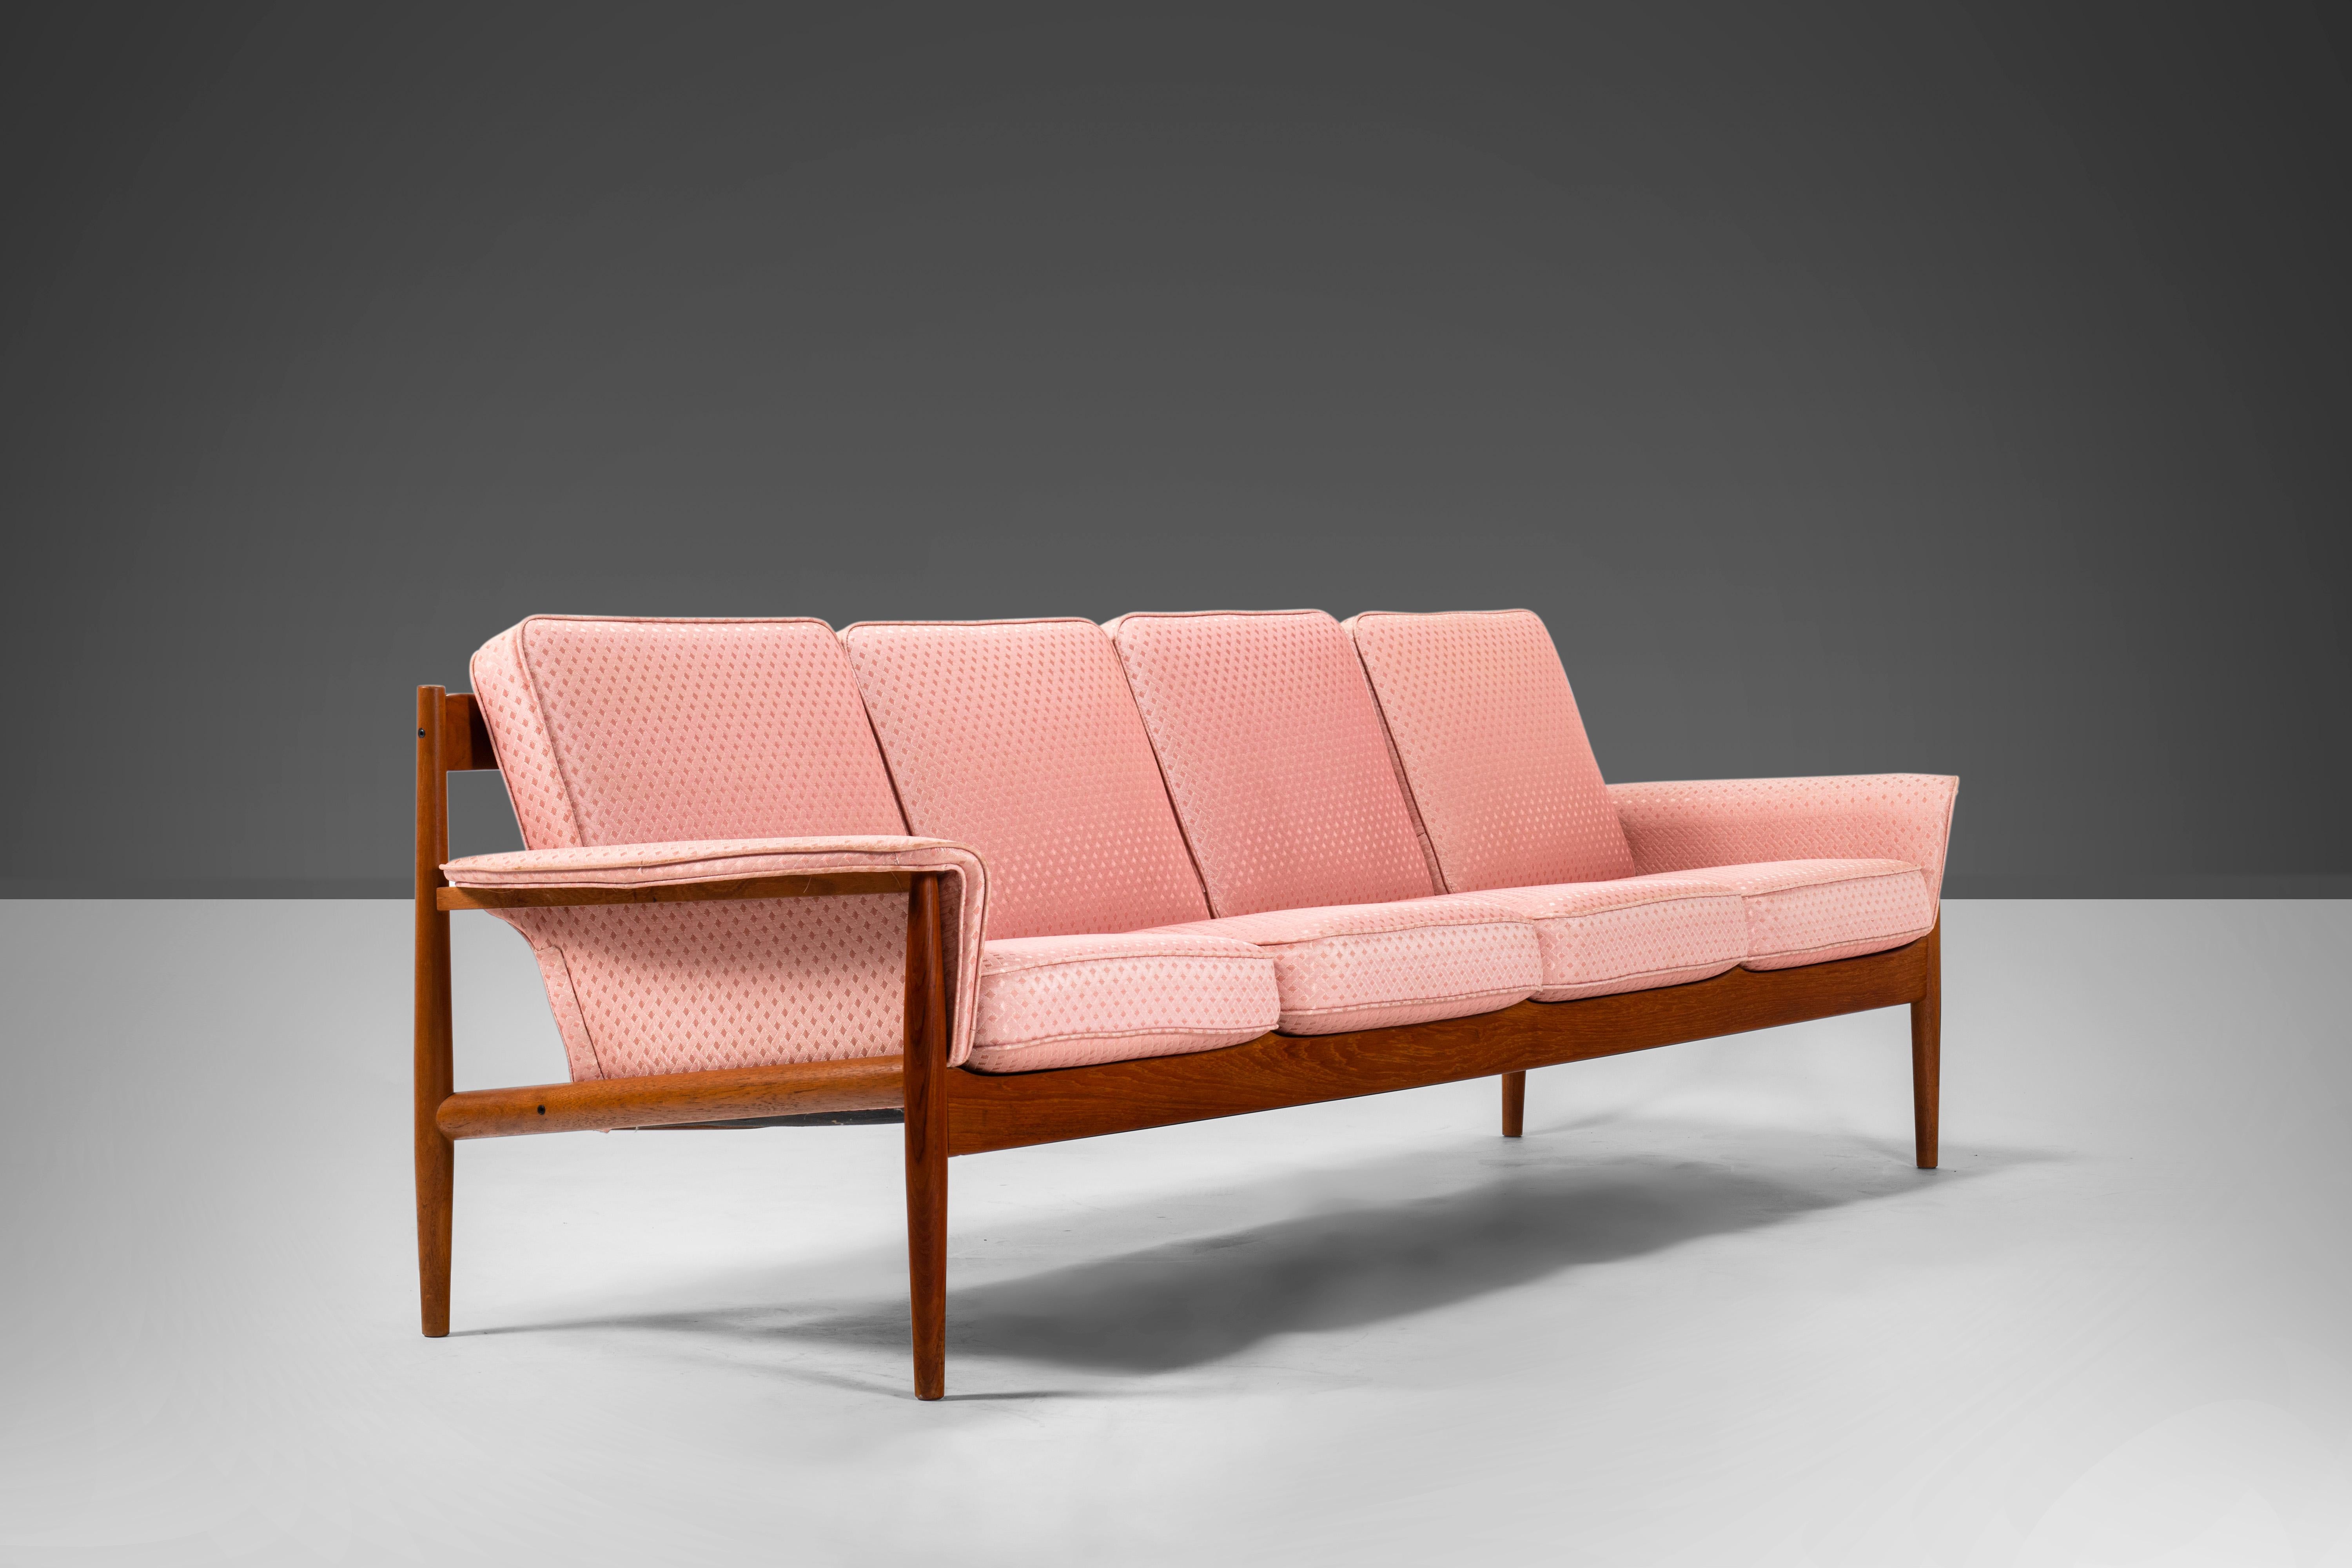 Rare and exceptional is this sculptural sofa by Grete Jalk for France & Son. This four-seat sofa features contoured slats that create a spectacular line from the back and side angles. The flared armrests and original sprung cushions are upholstered